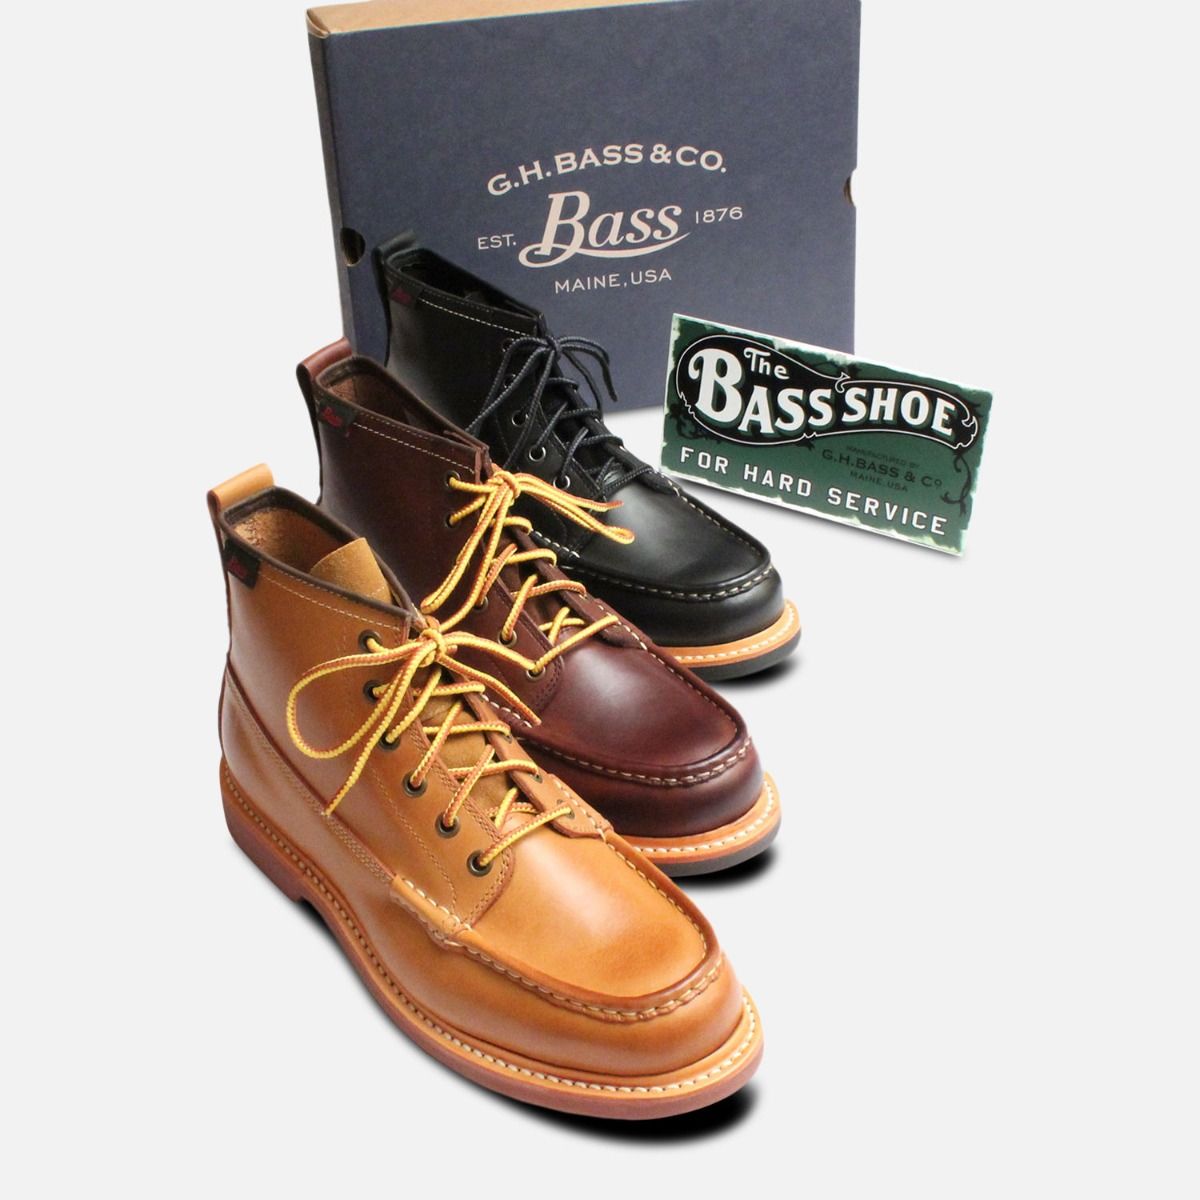 bass brand shoes